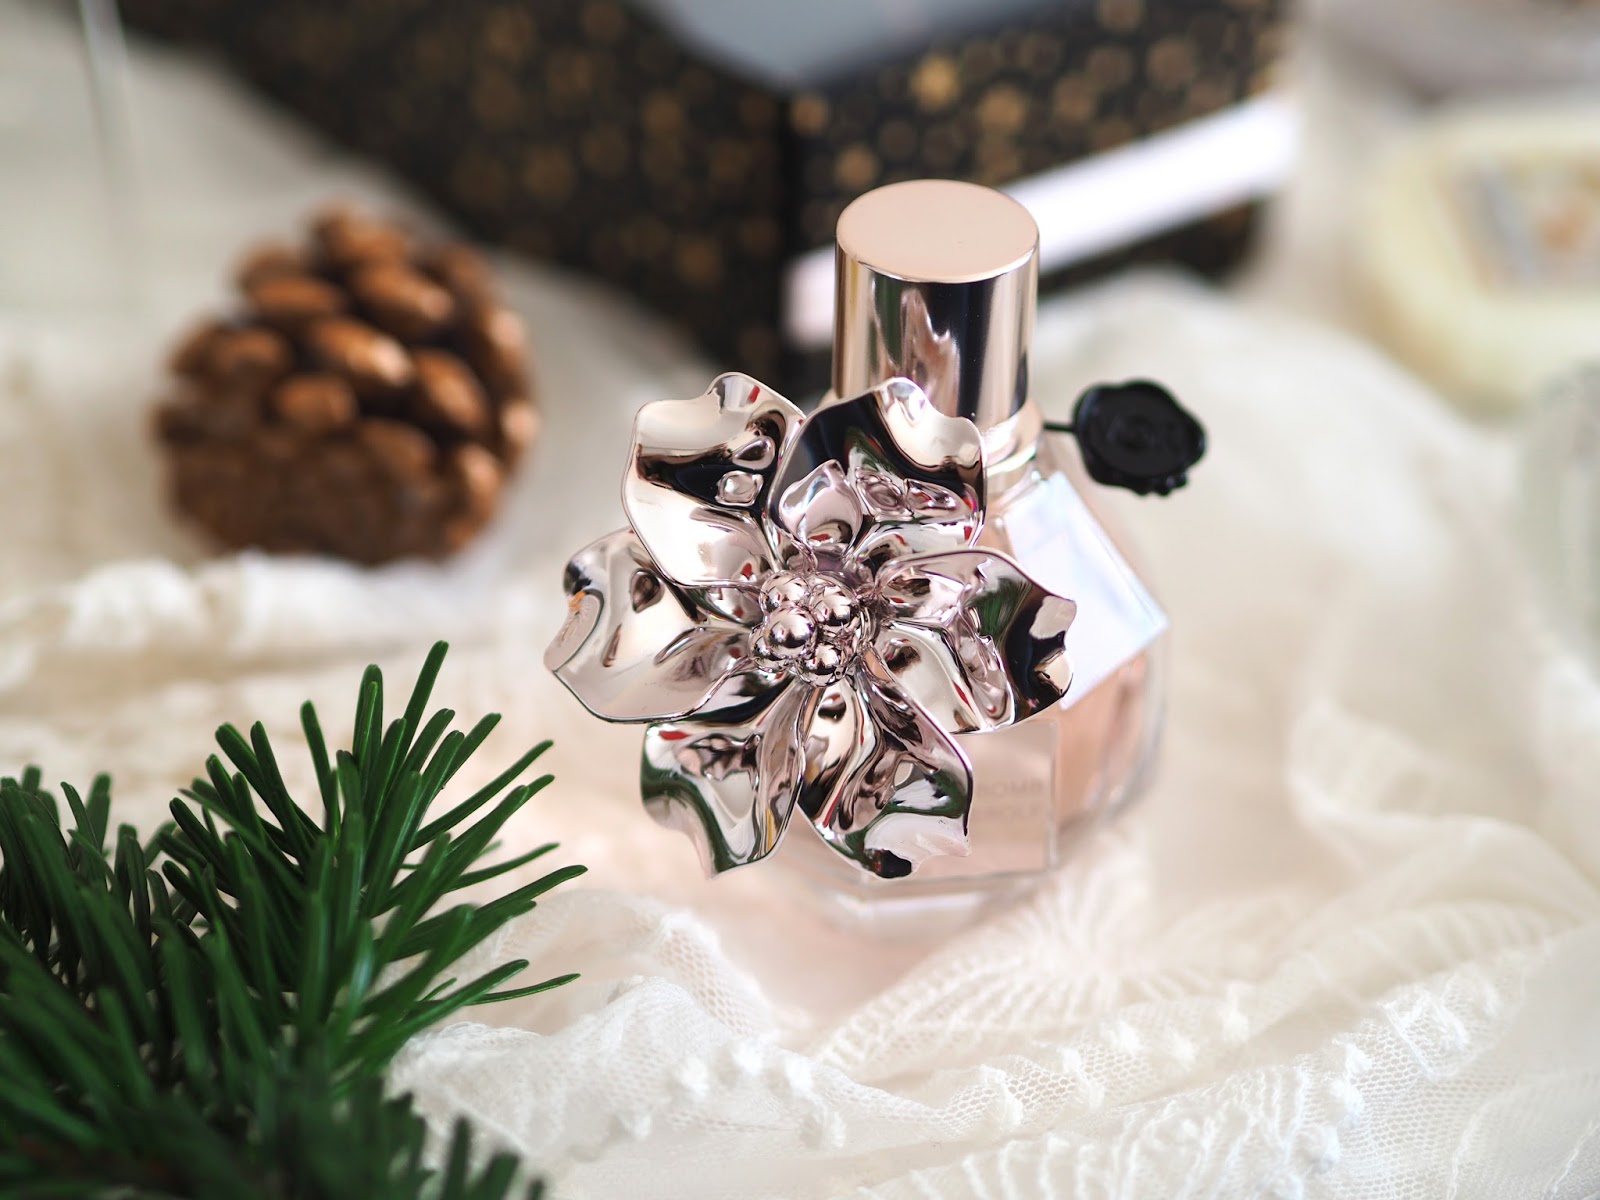 The Scented Gift Guide, Katie Kirk Loves, UK Blogger, Beauty Blogger, Christmas, Christmas Gifts, Gift Guide, Gift Ideas, Beauty Gifts, Lifestyle, Luxury Gifts, Charlotte Tilbury, Viktor & Rolf Flower Bomb, Debenhams Beauty, Lush Cosmetics, Oasis Fashion, Rose Gold, Yankee Candle, The Little Candle Co, So...? Perfume, Diptique, Jo Malone, Christmas Fragrances, Fragranced Gifts, Christmas Scents, Christmas Magic, The Perfect Tree, Crackling Wood Fire, Spiced White Cocoa, Christmas Giveaway, Candle Giveaway, Monsoon Rose Gold Perfume